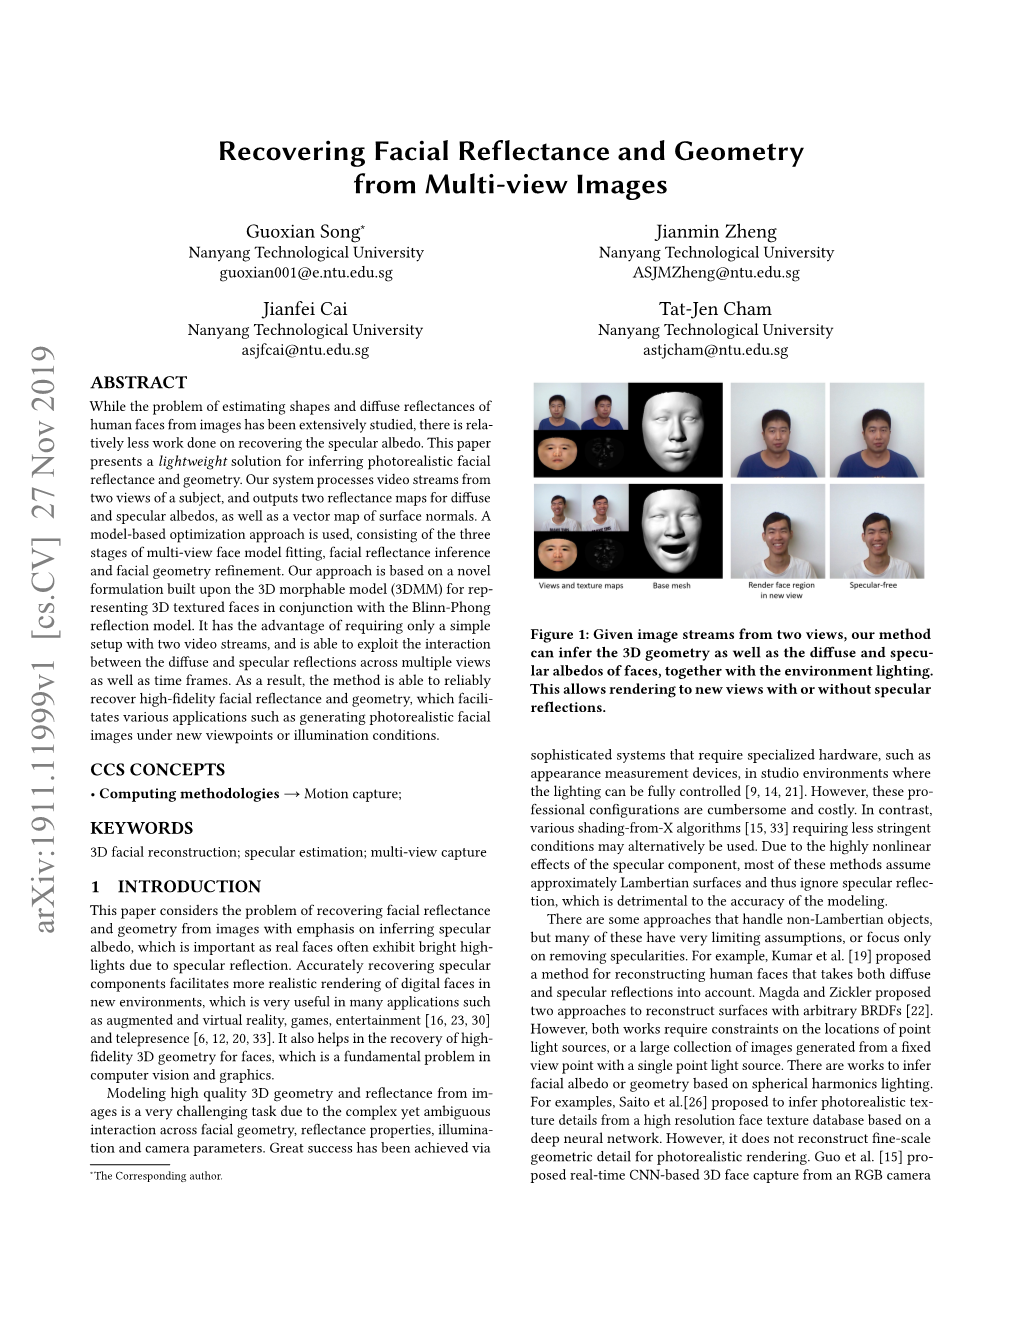 Recovering Facial Reflectance and Geometry from Multi-View Images